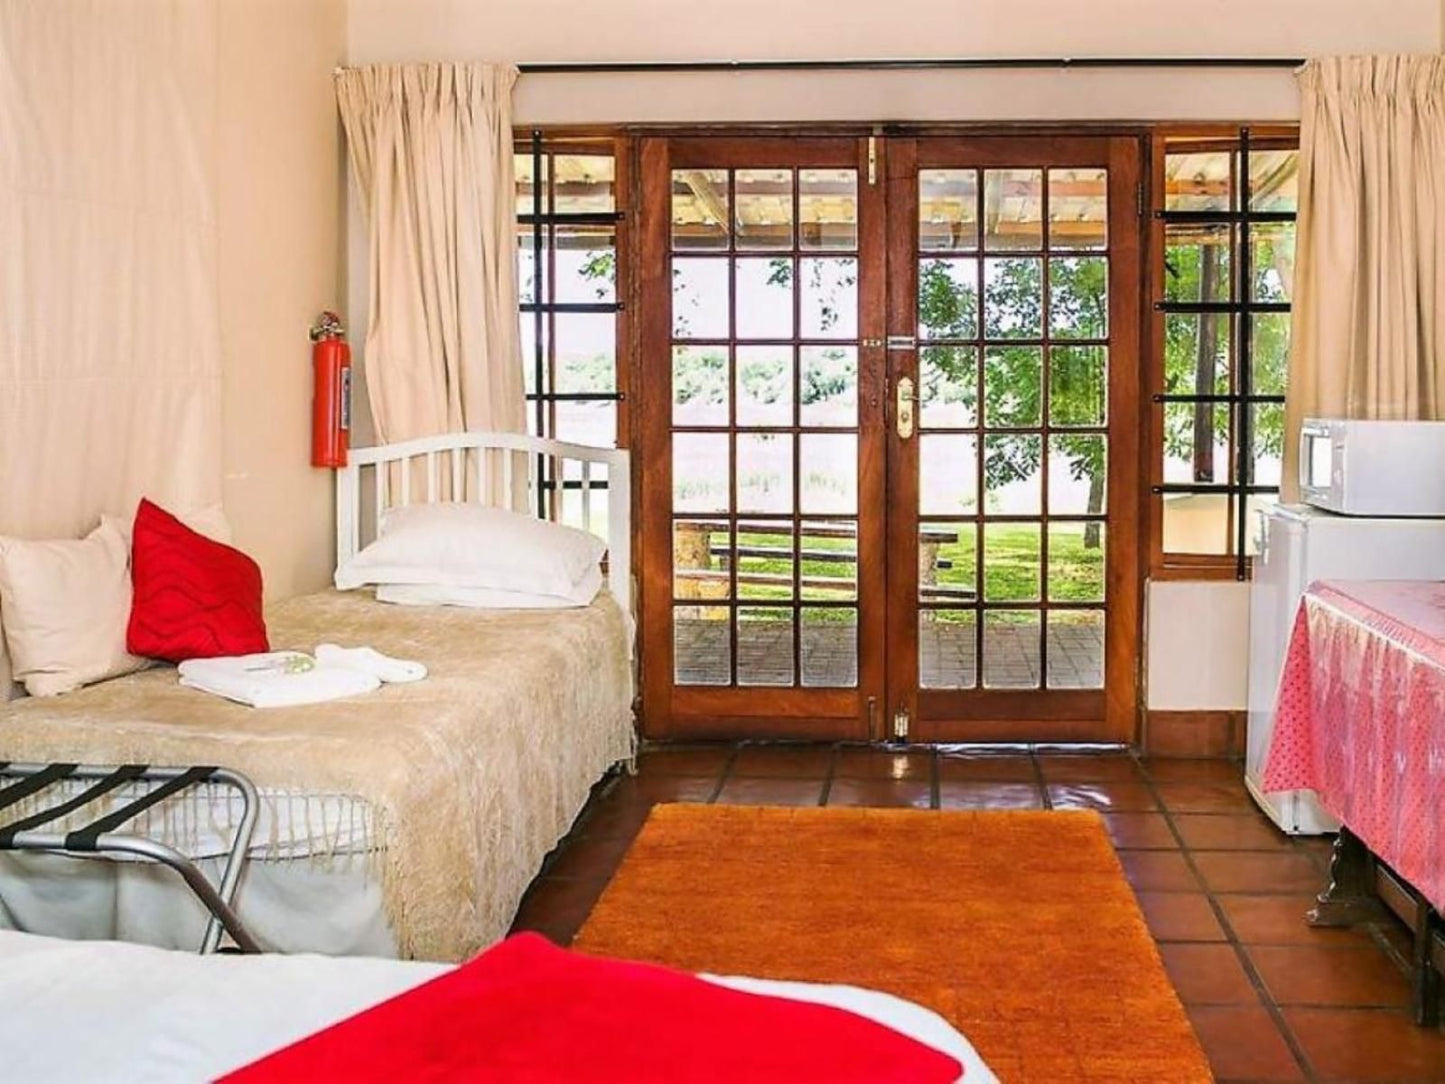 River Bank Lodge Upington Northern Cape South Africa Bedroom